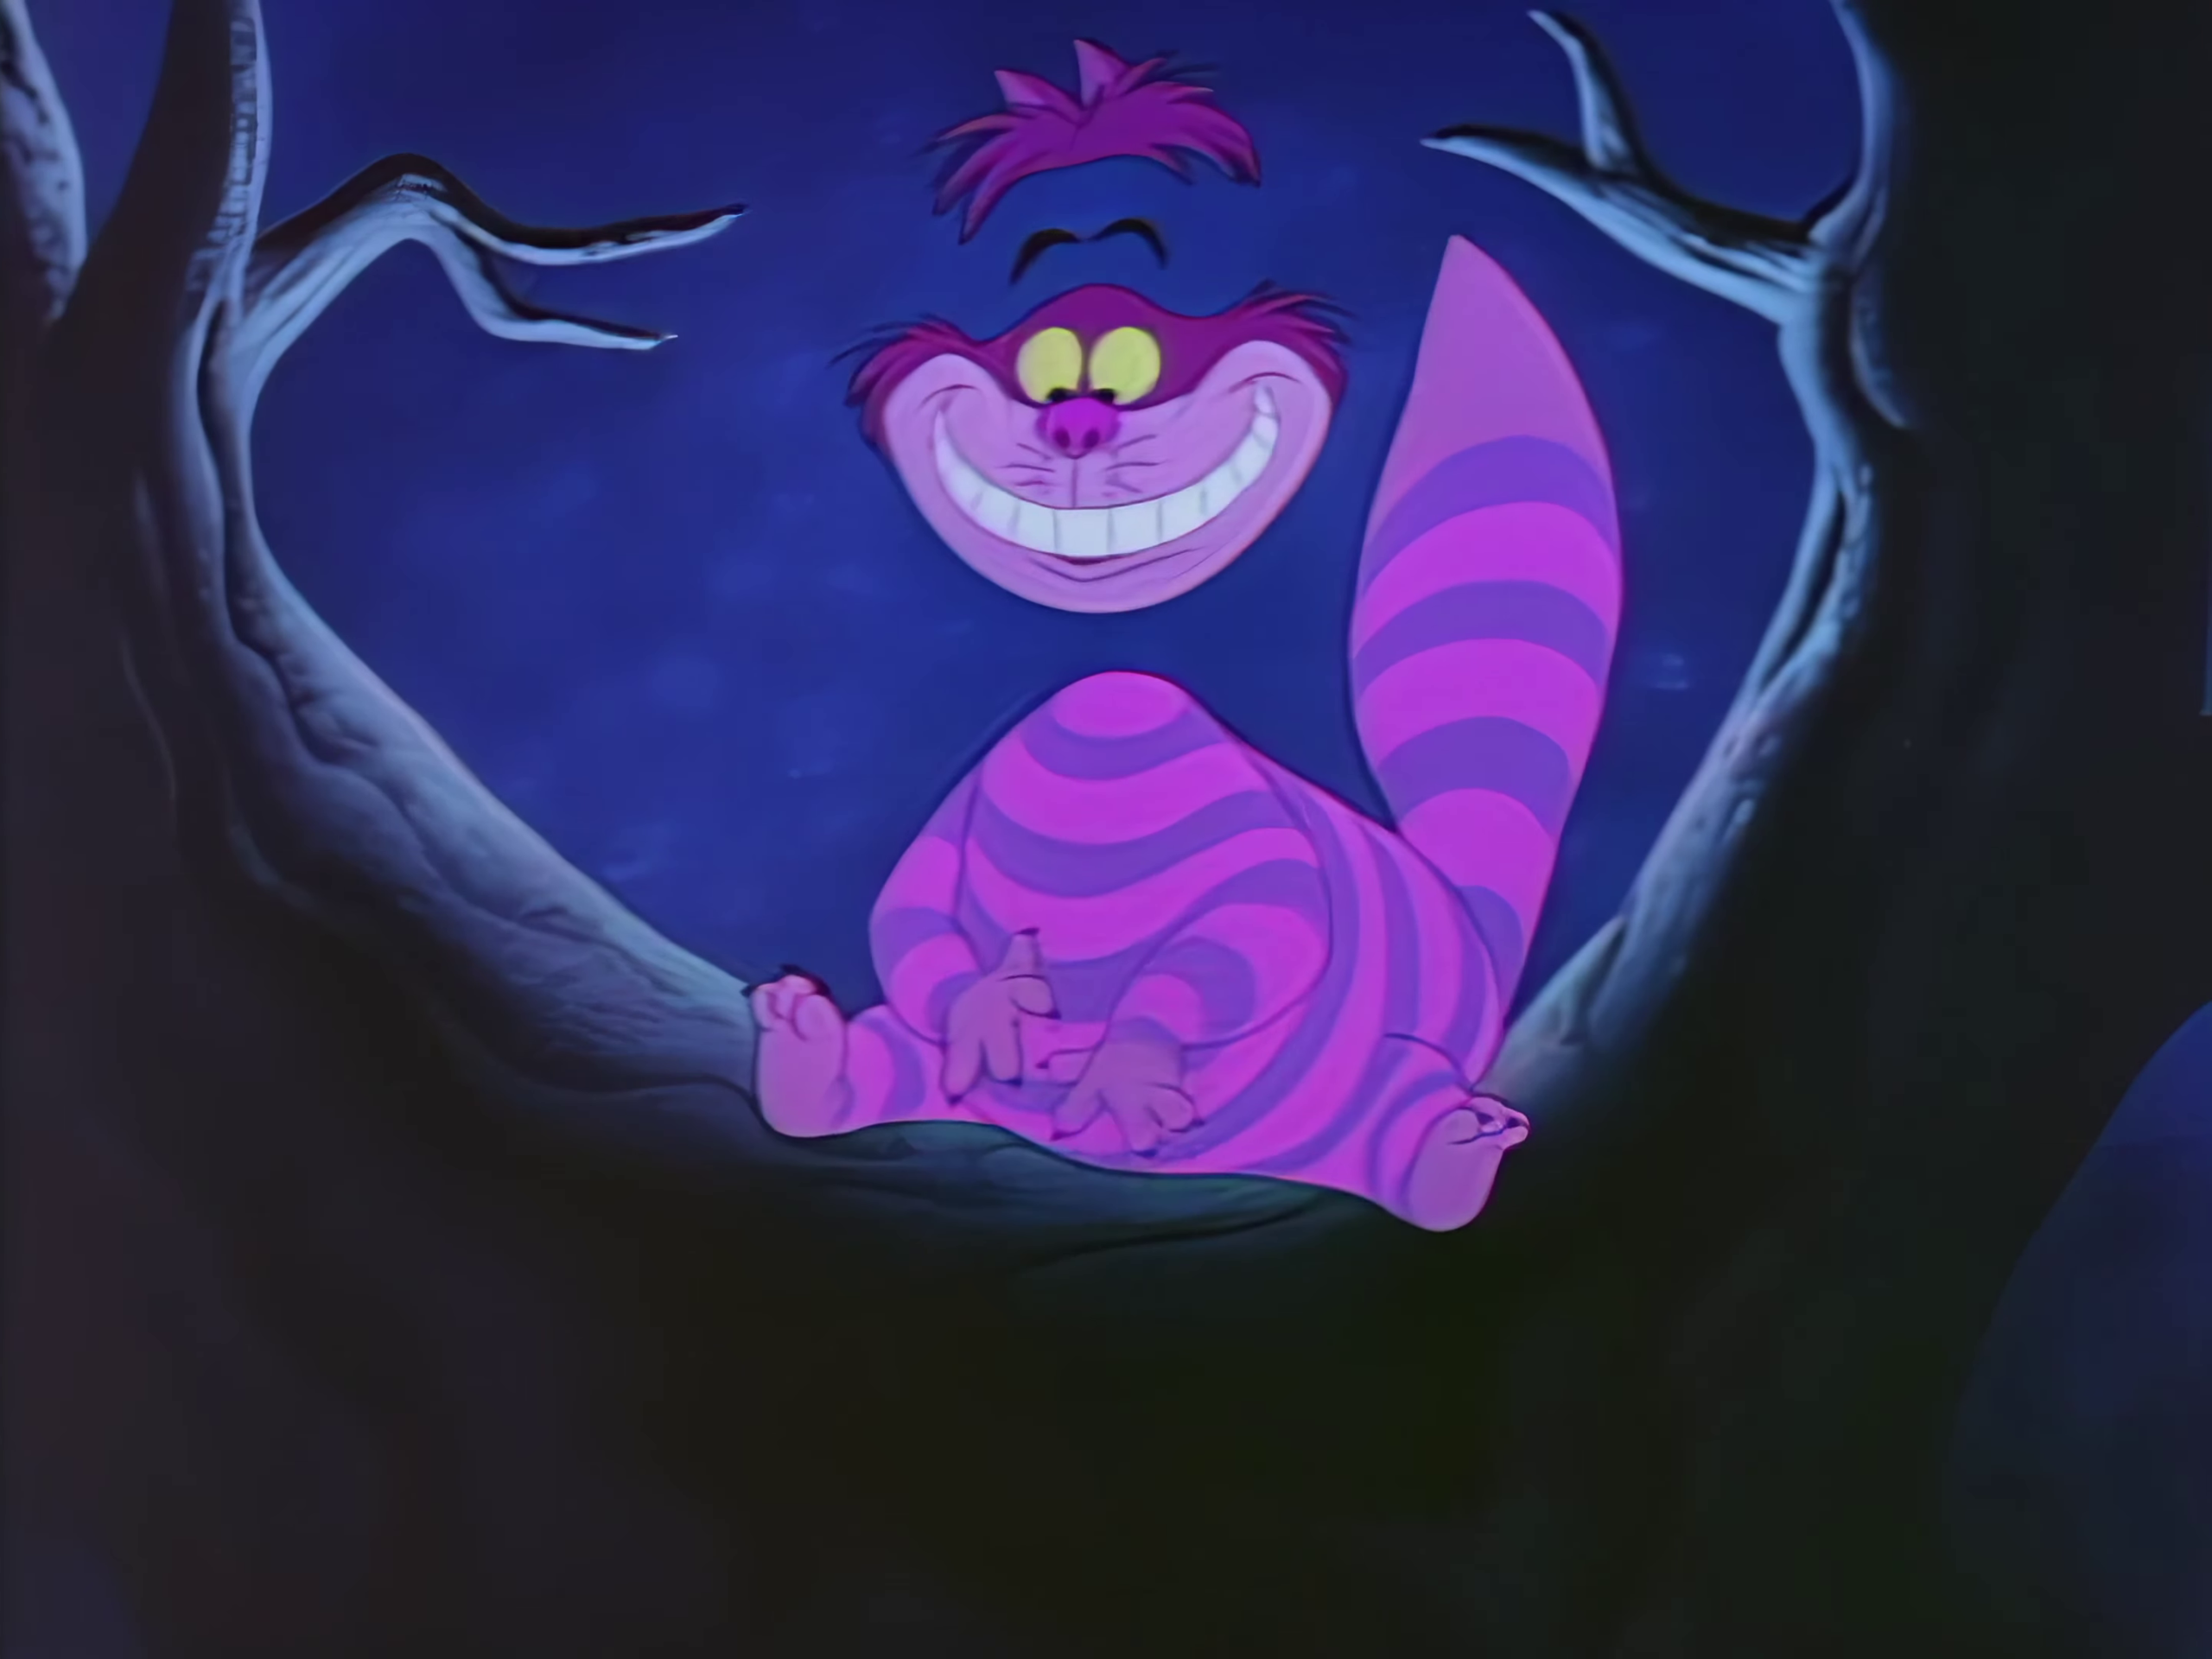 File:Alice in Wonderland (1951) - Cheshire Cat.png - Wikimedia Commons